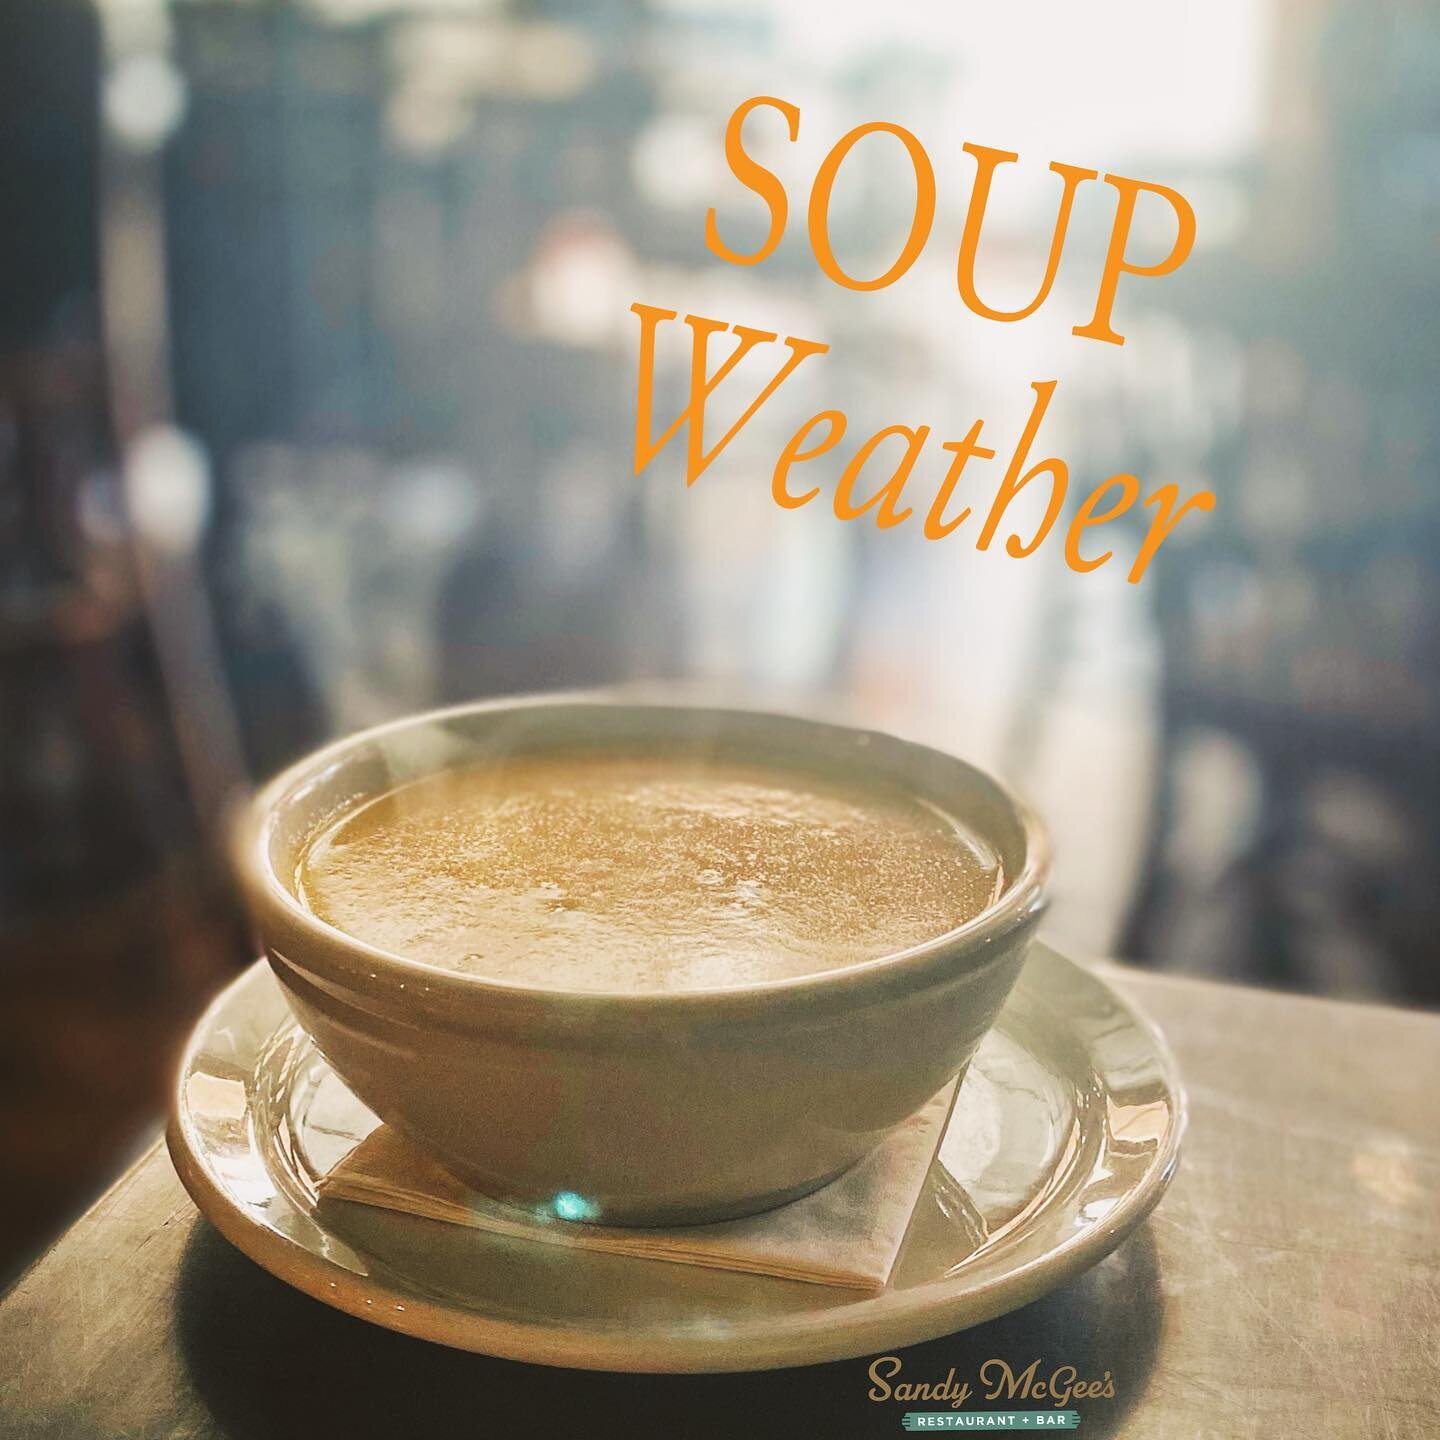 We sold out of our famous Broccoli Cheese Soup last Friday 😳 Don&rsquo;t worry, we&rsquo;ve got plenty of fresh-made soup today!
🥣❄️🧀🥣❄️🧀🥣❄️🧀
This cold weather gets people in the mood for hot soup, so come get before it&rsquo;s gone again 😉 A